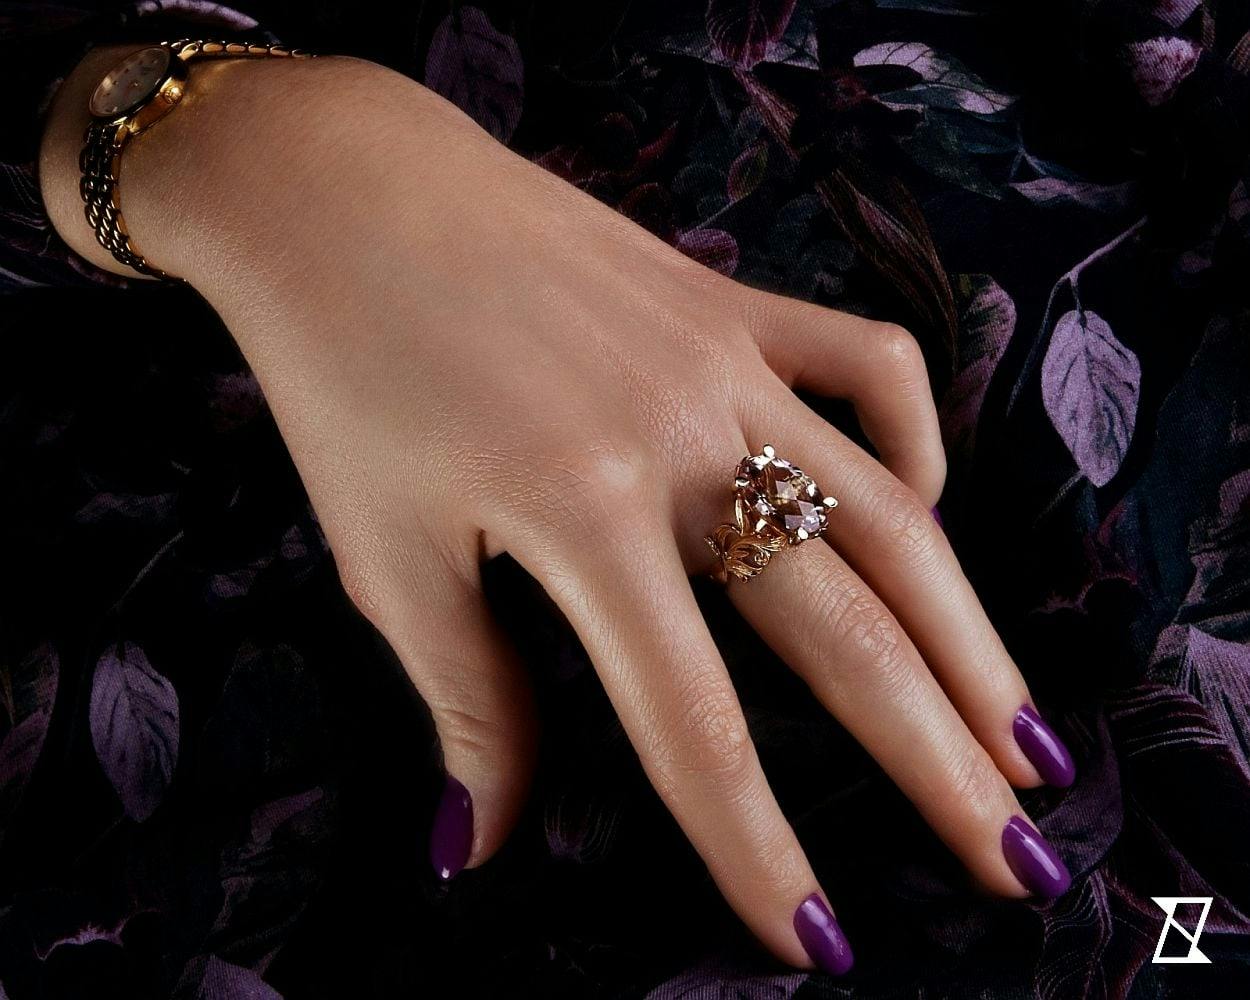 Morganite ring on a hand of a model.